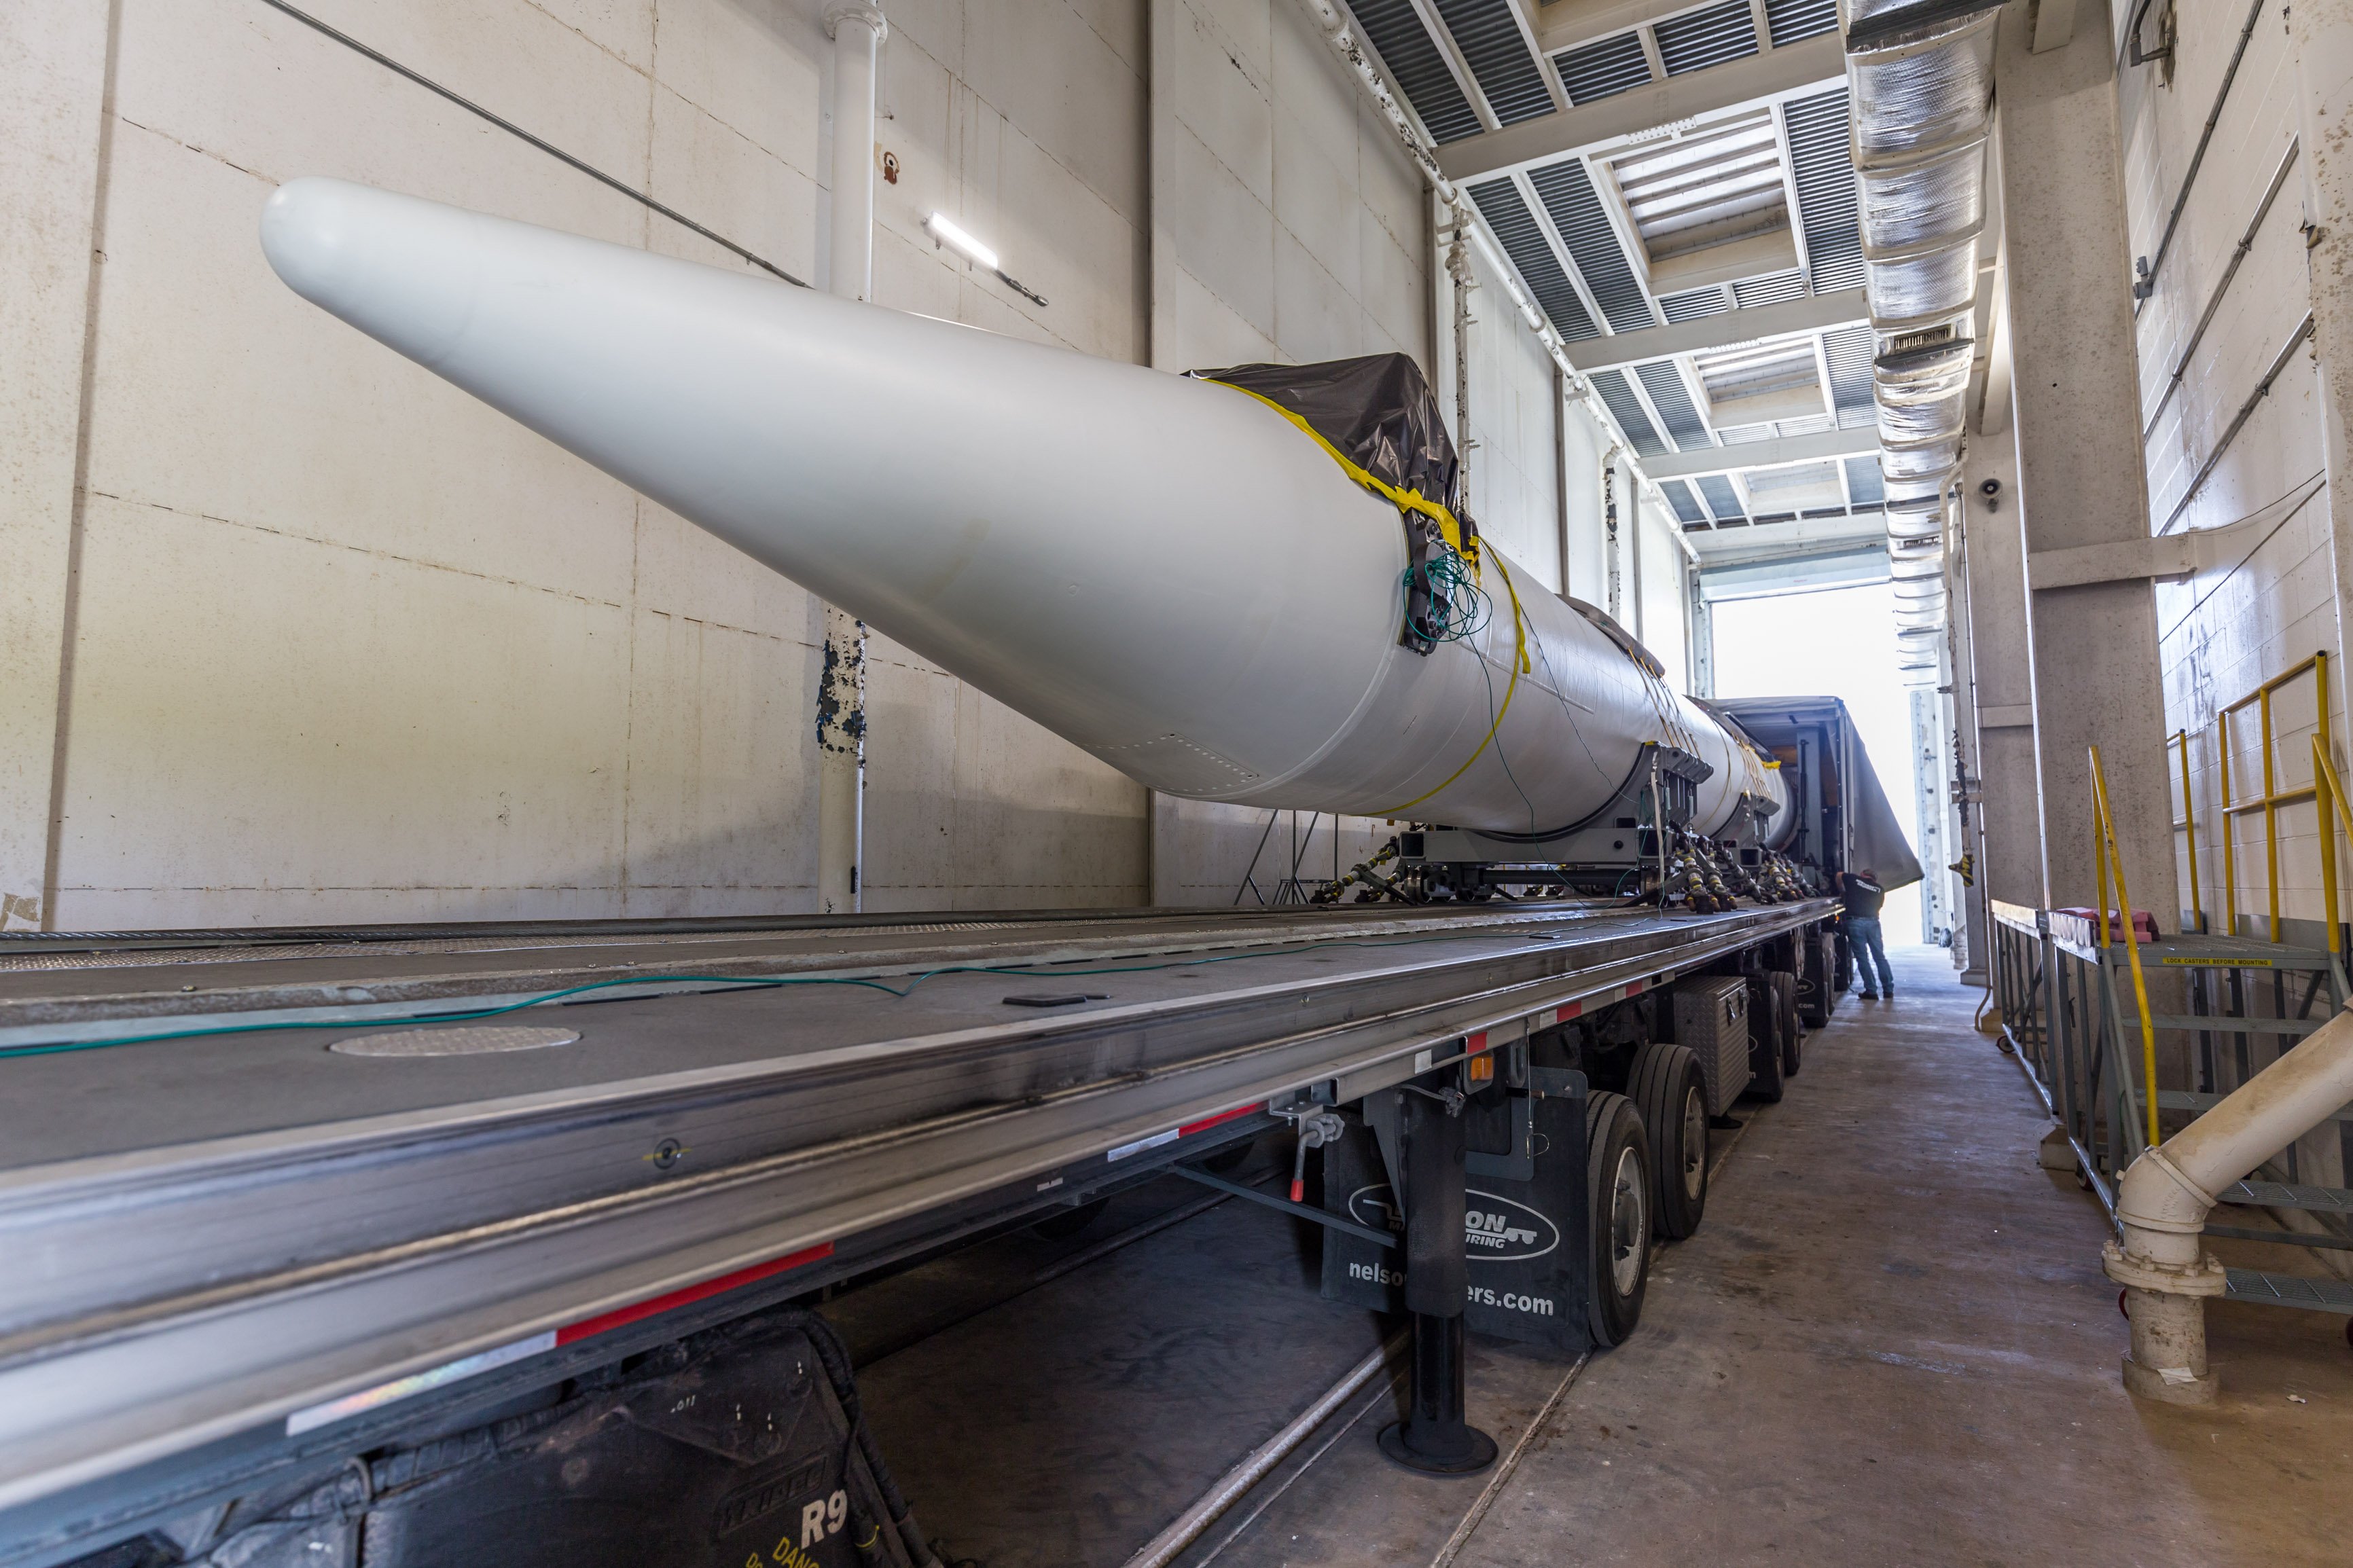 The first GEM 63XL booster for Vulcan are received at Cape Canaveral. Photo by United Launch Alliance